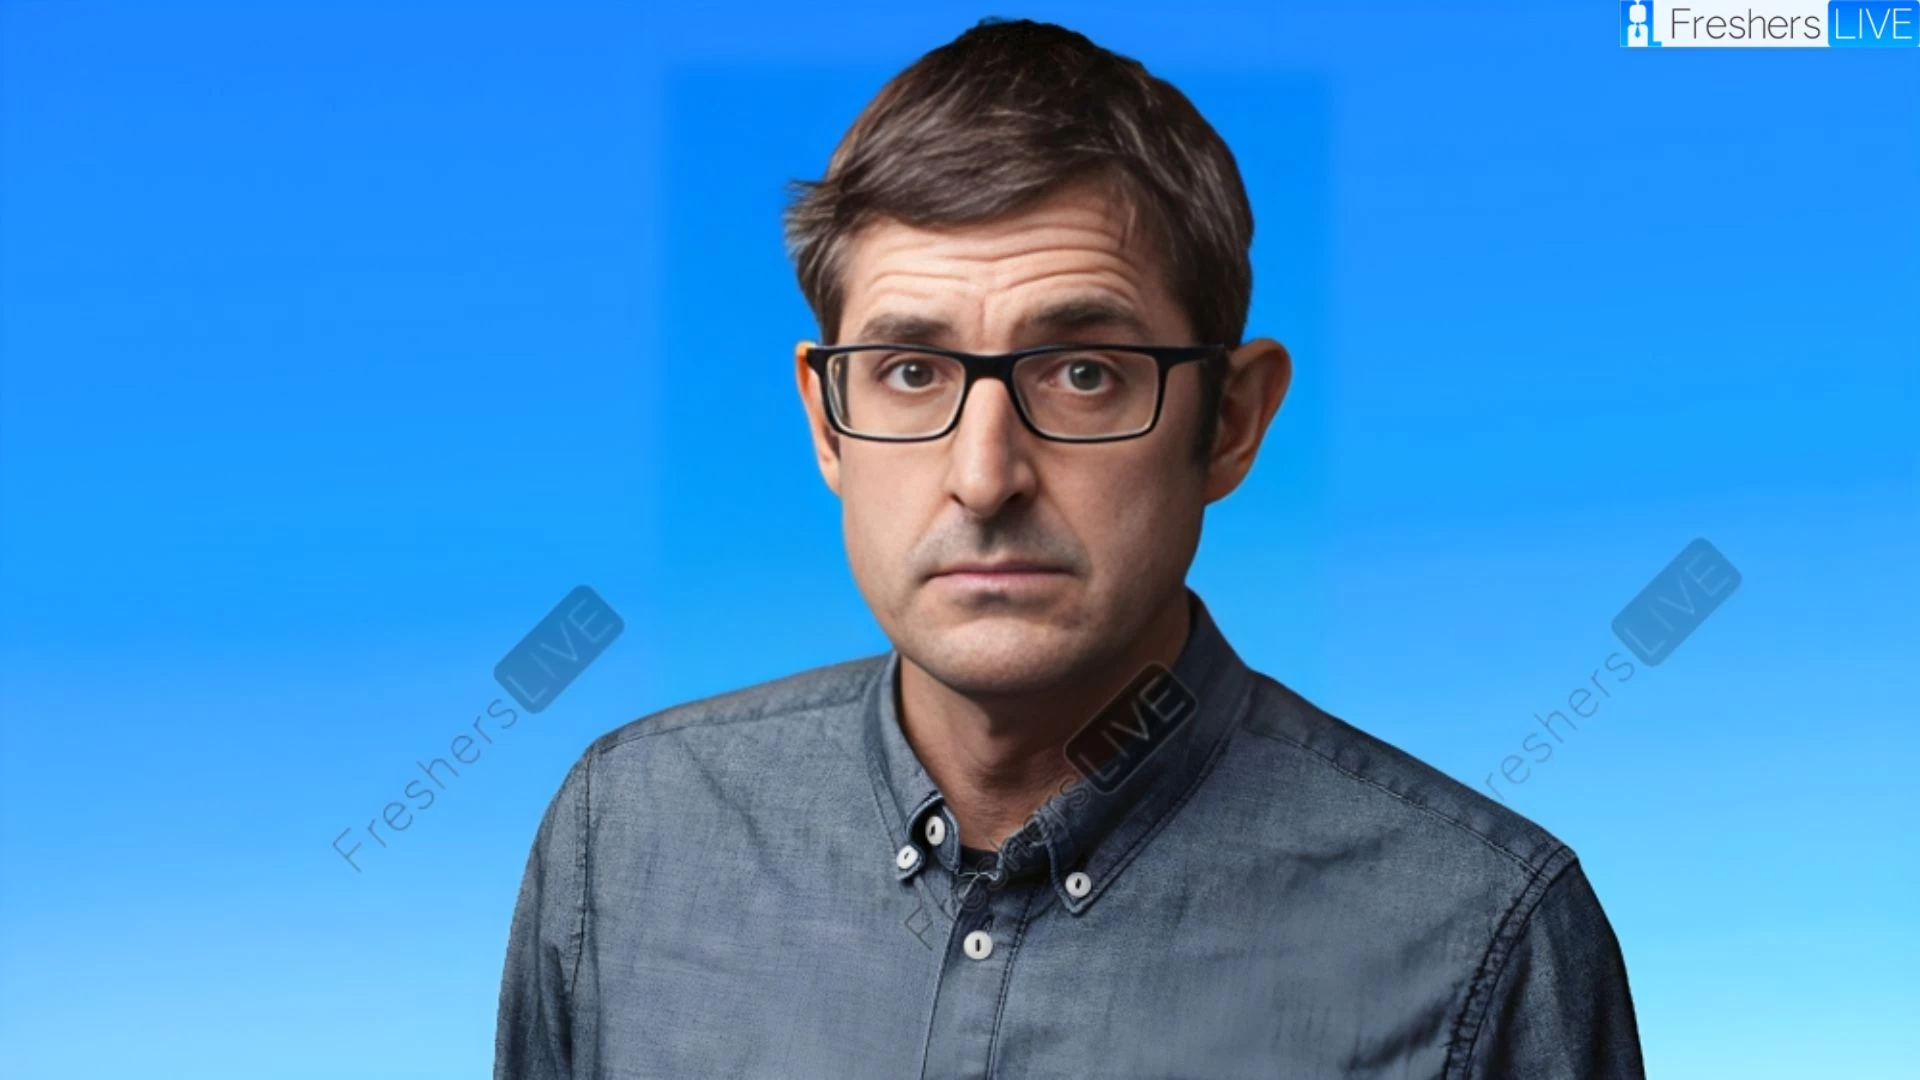 Louis Theroux Ethnicity, What is Louis Theroux's Ethnicity?